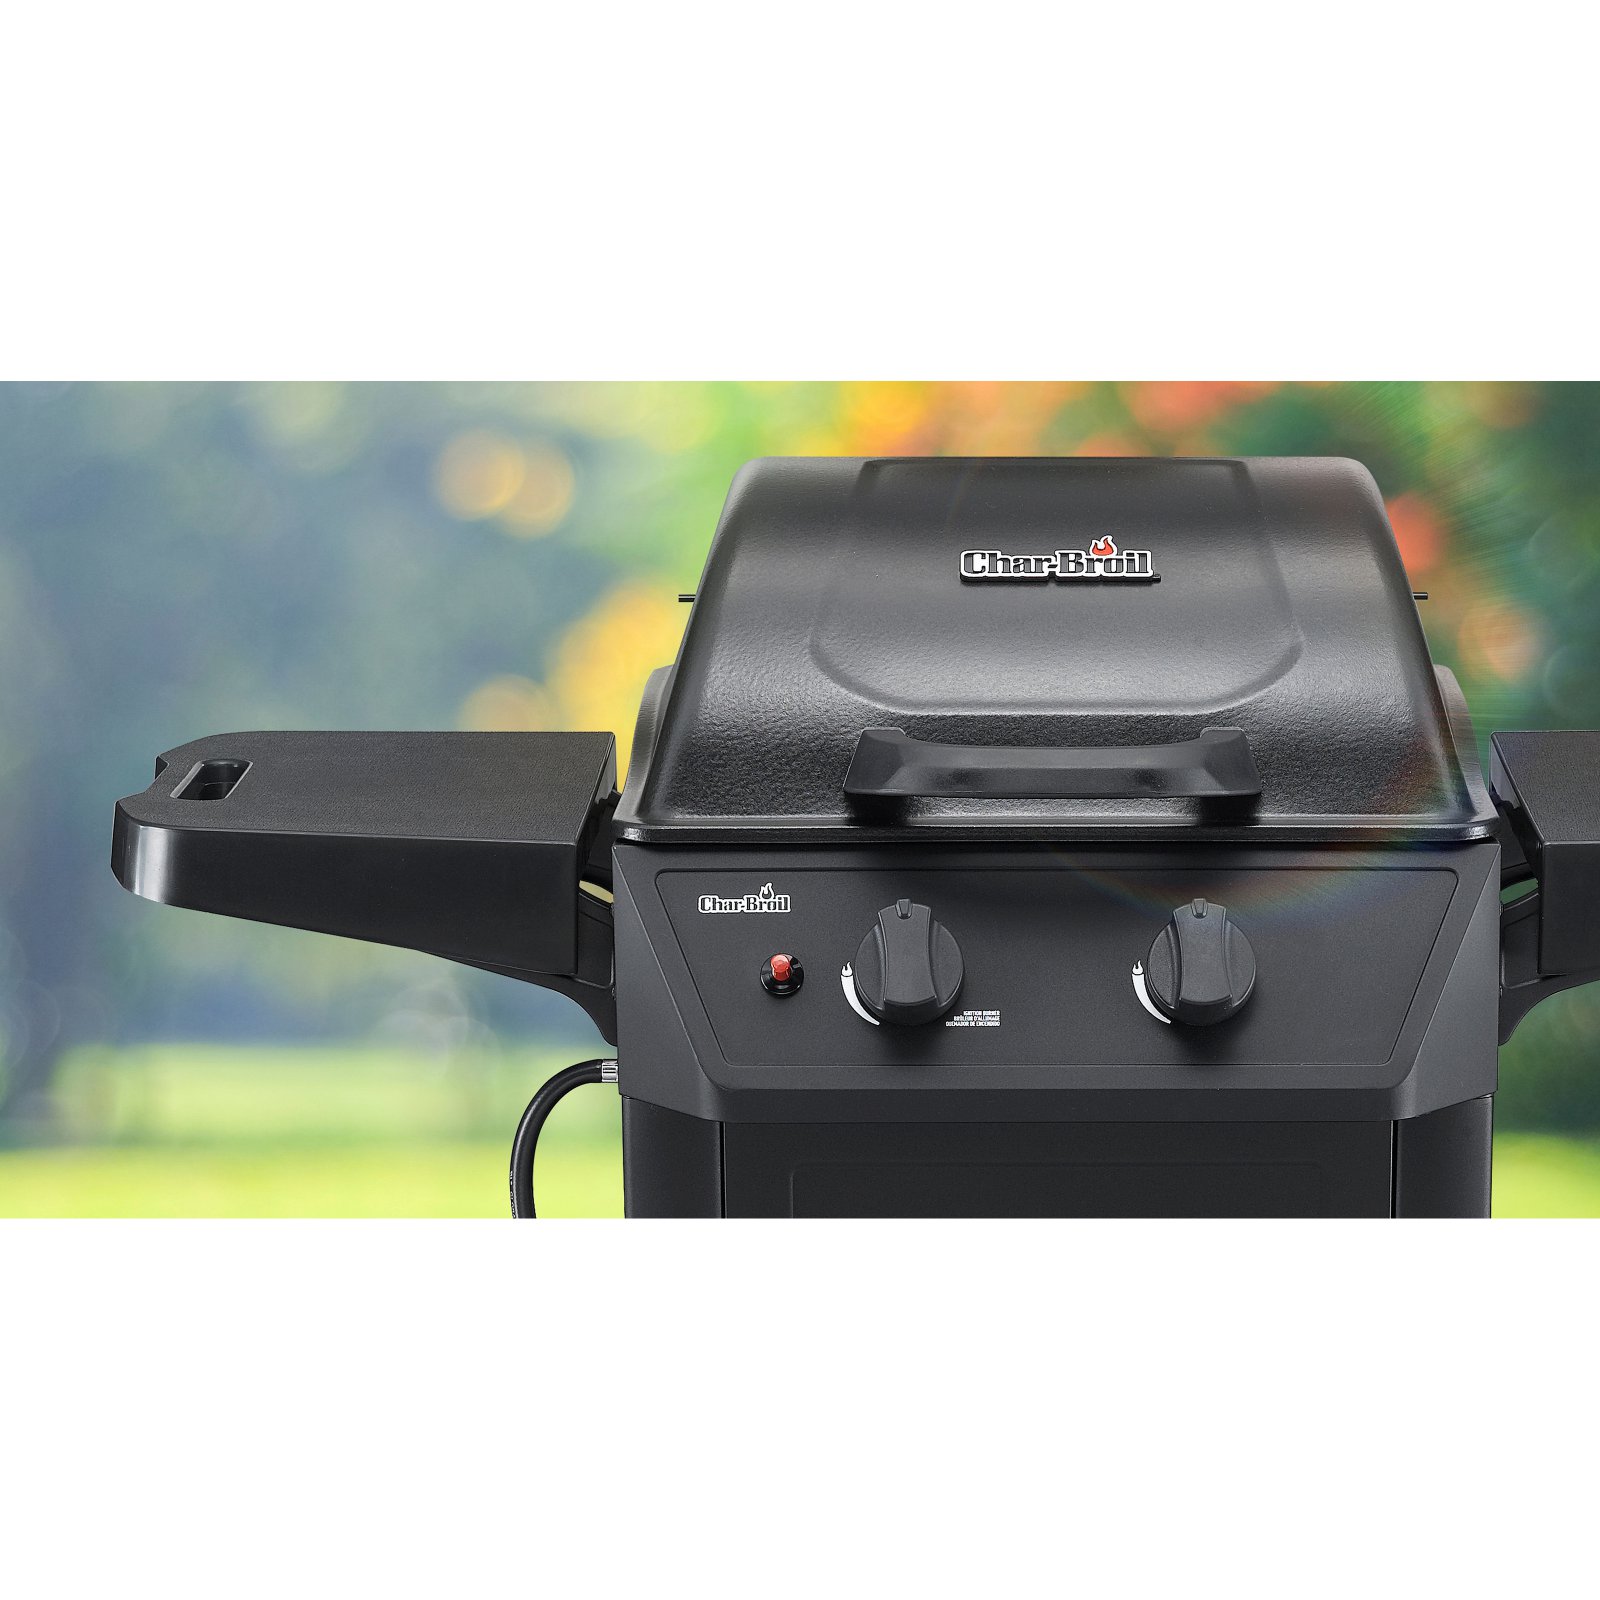 Char-Broil 300-Square Inch Gas Grill - image 2 of 9